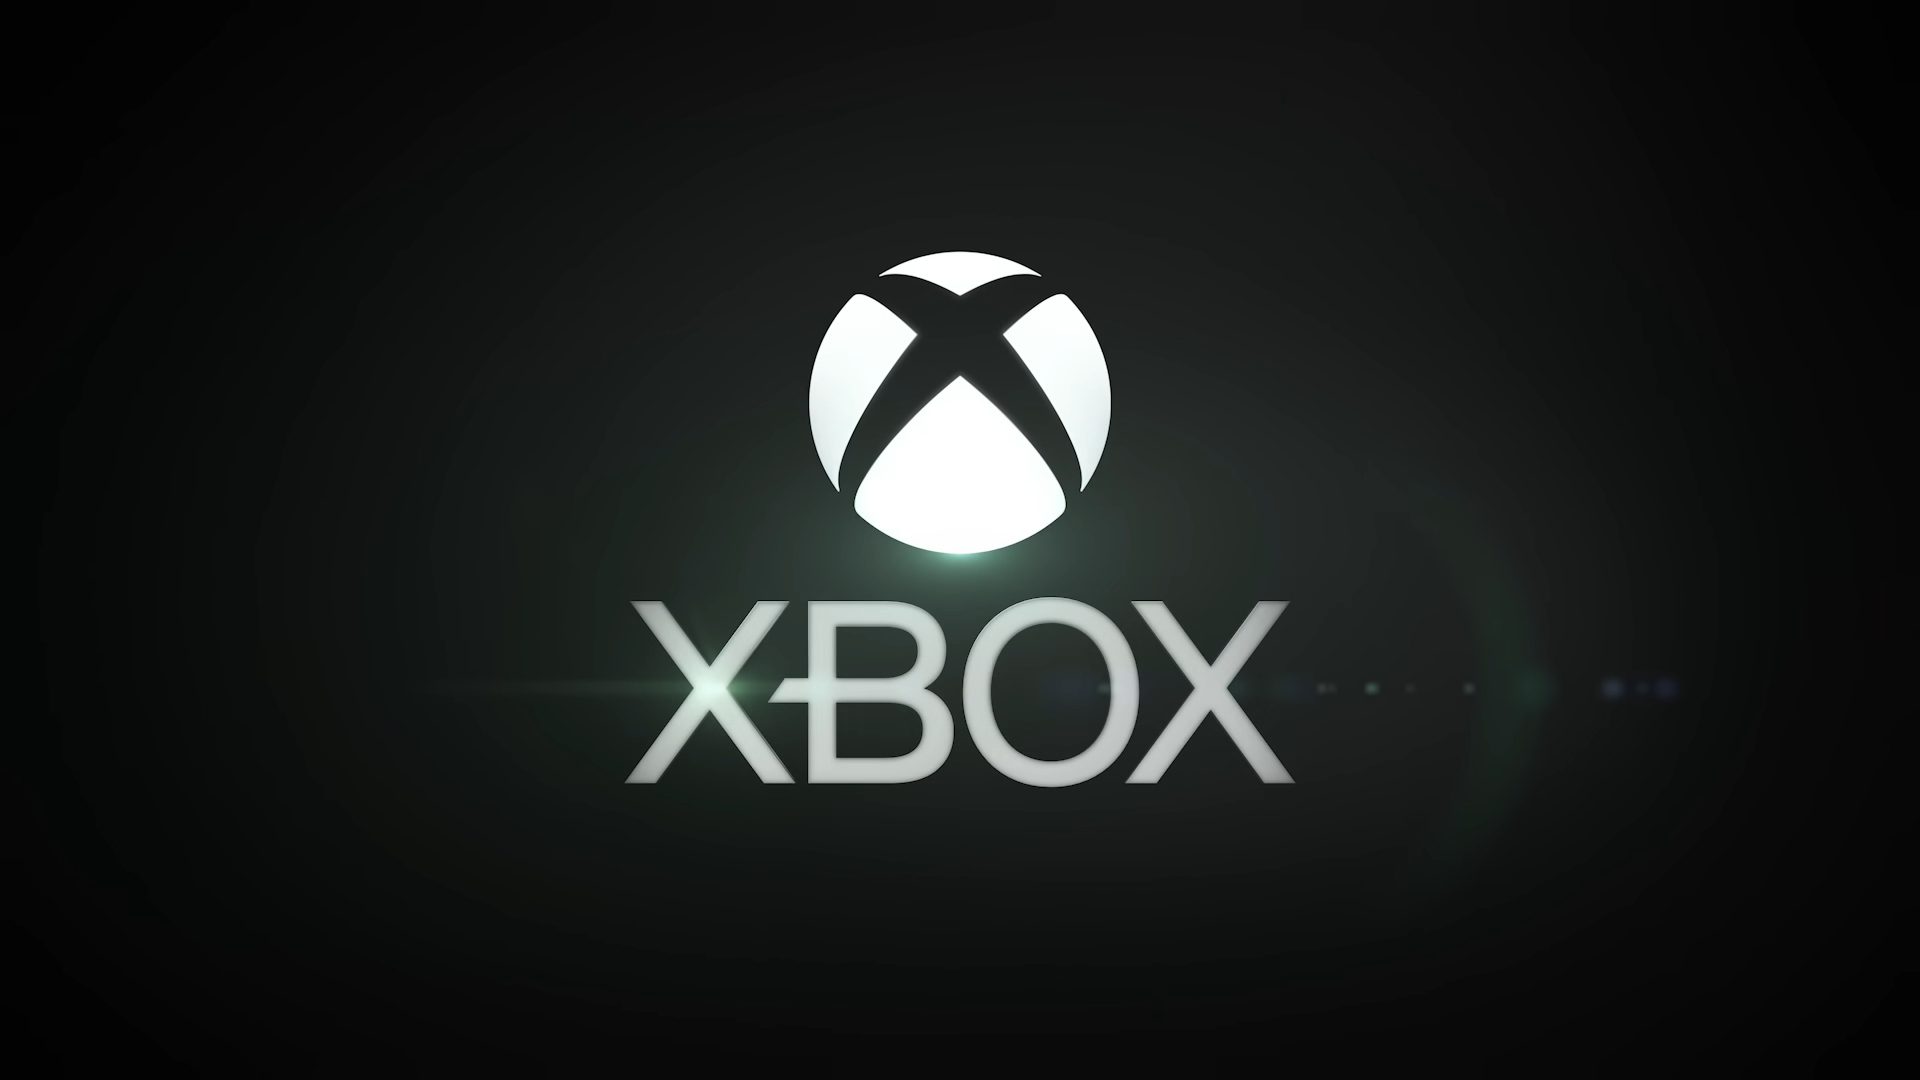 Redfall Mock Internal Reviews Rated It Double Digits Higher, Says Phil  Spencer